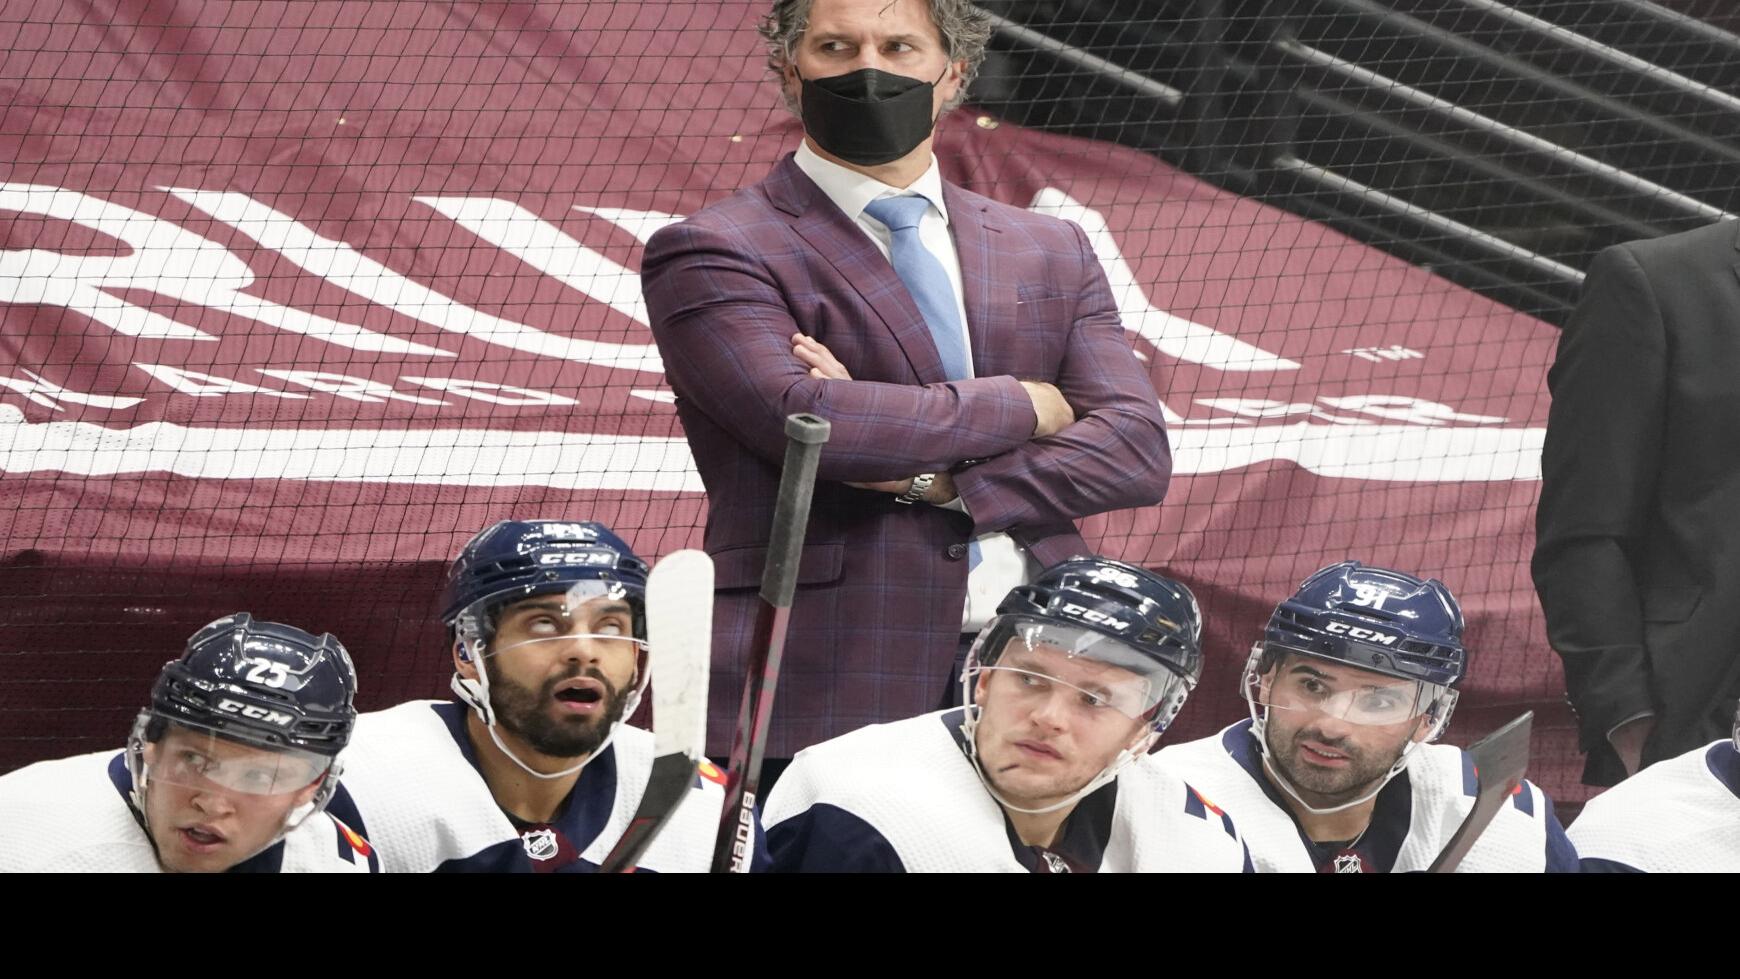 Colorado Avalanche — Suit photos. They're back.